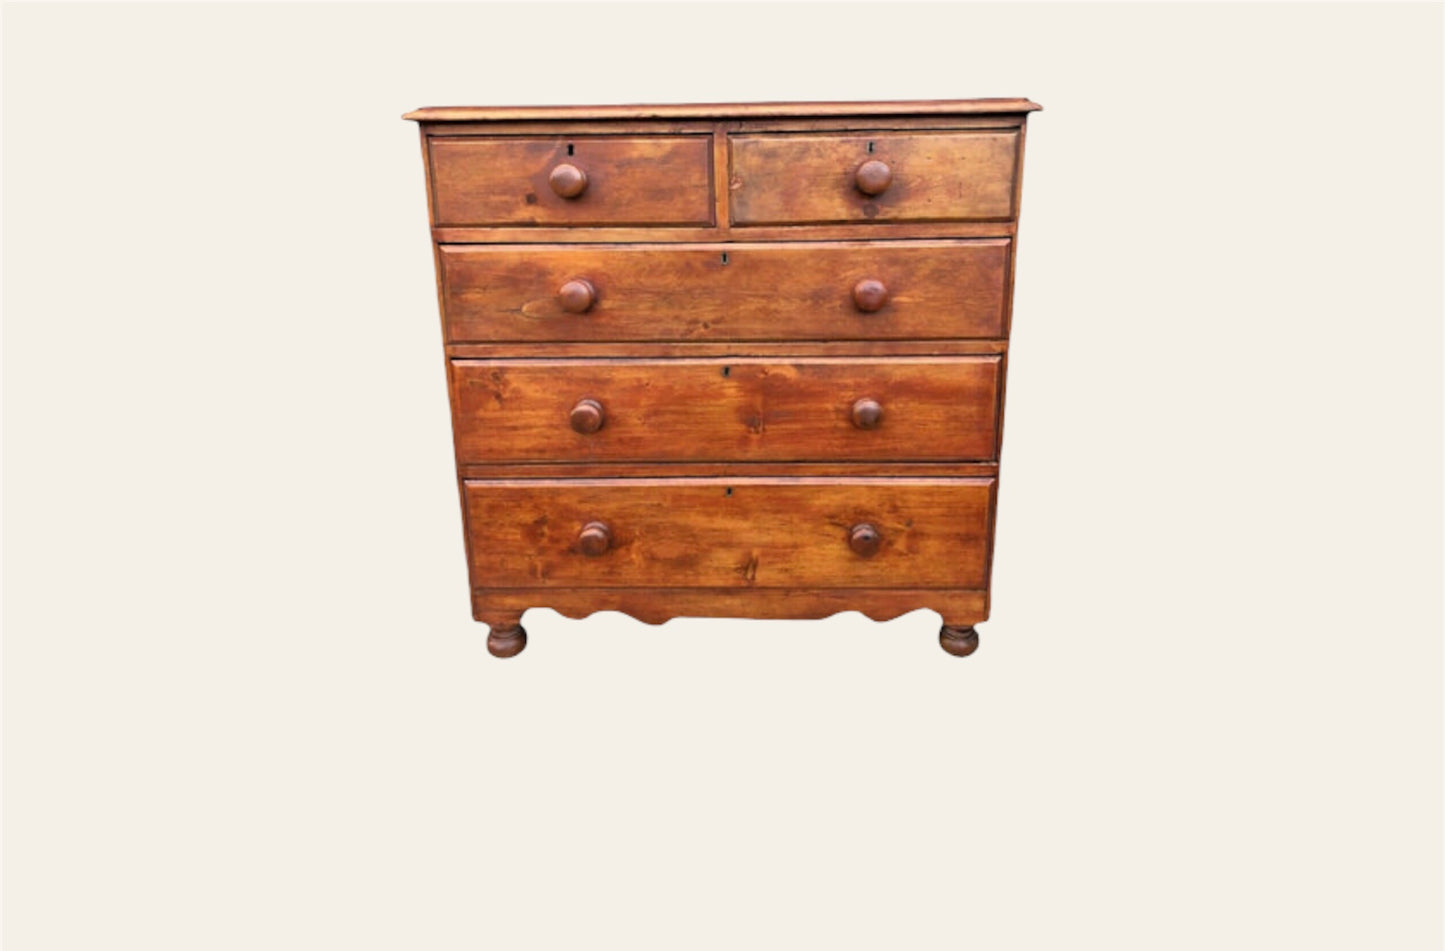 033.....Handsome Country House Stained Pine Chest Of Drawers ( sold )